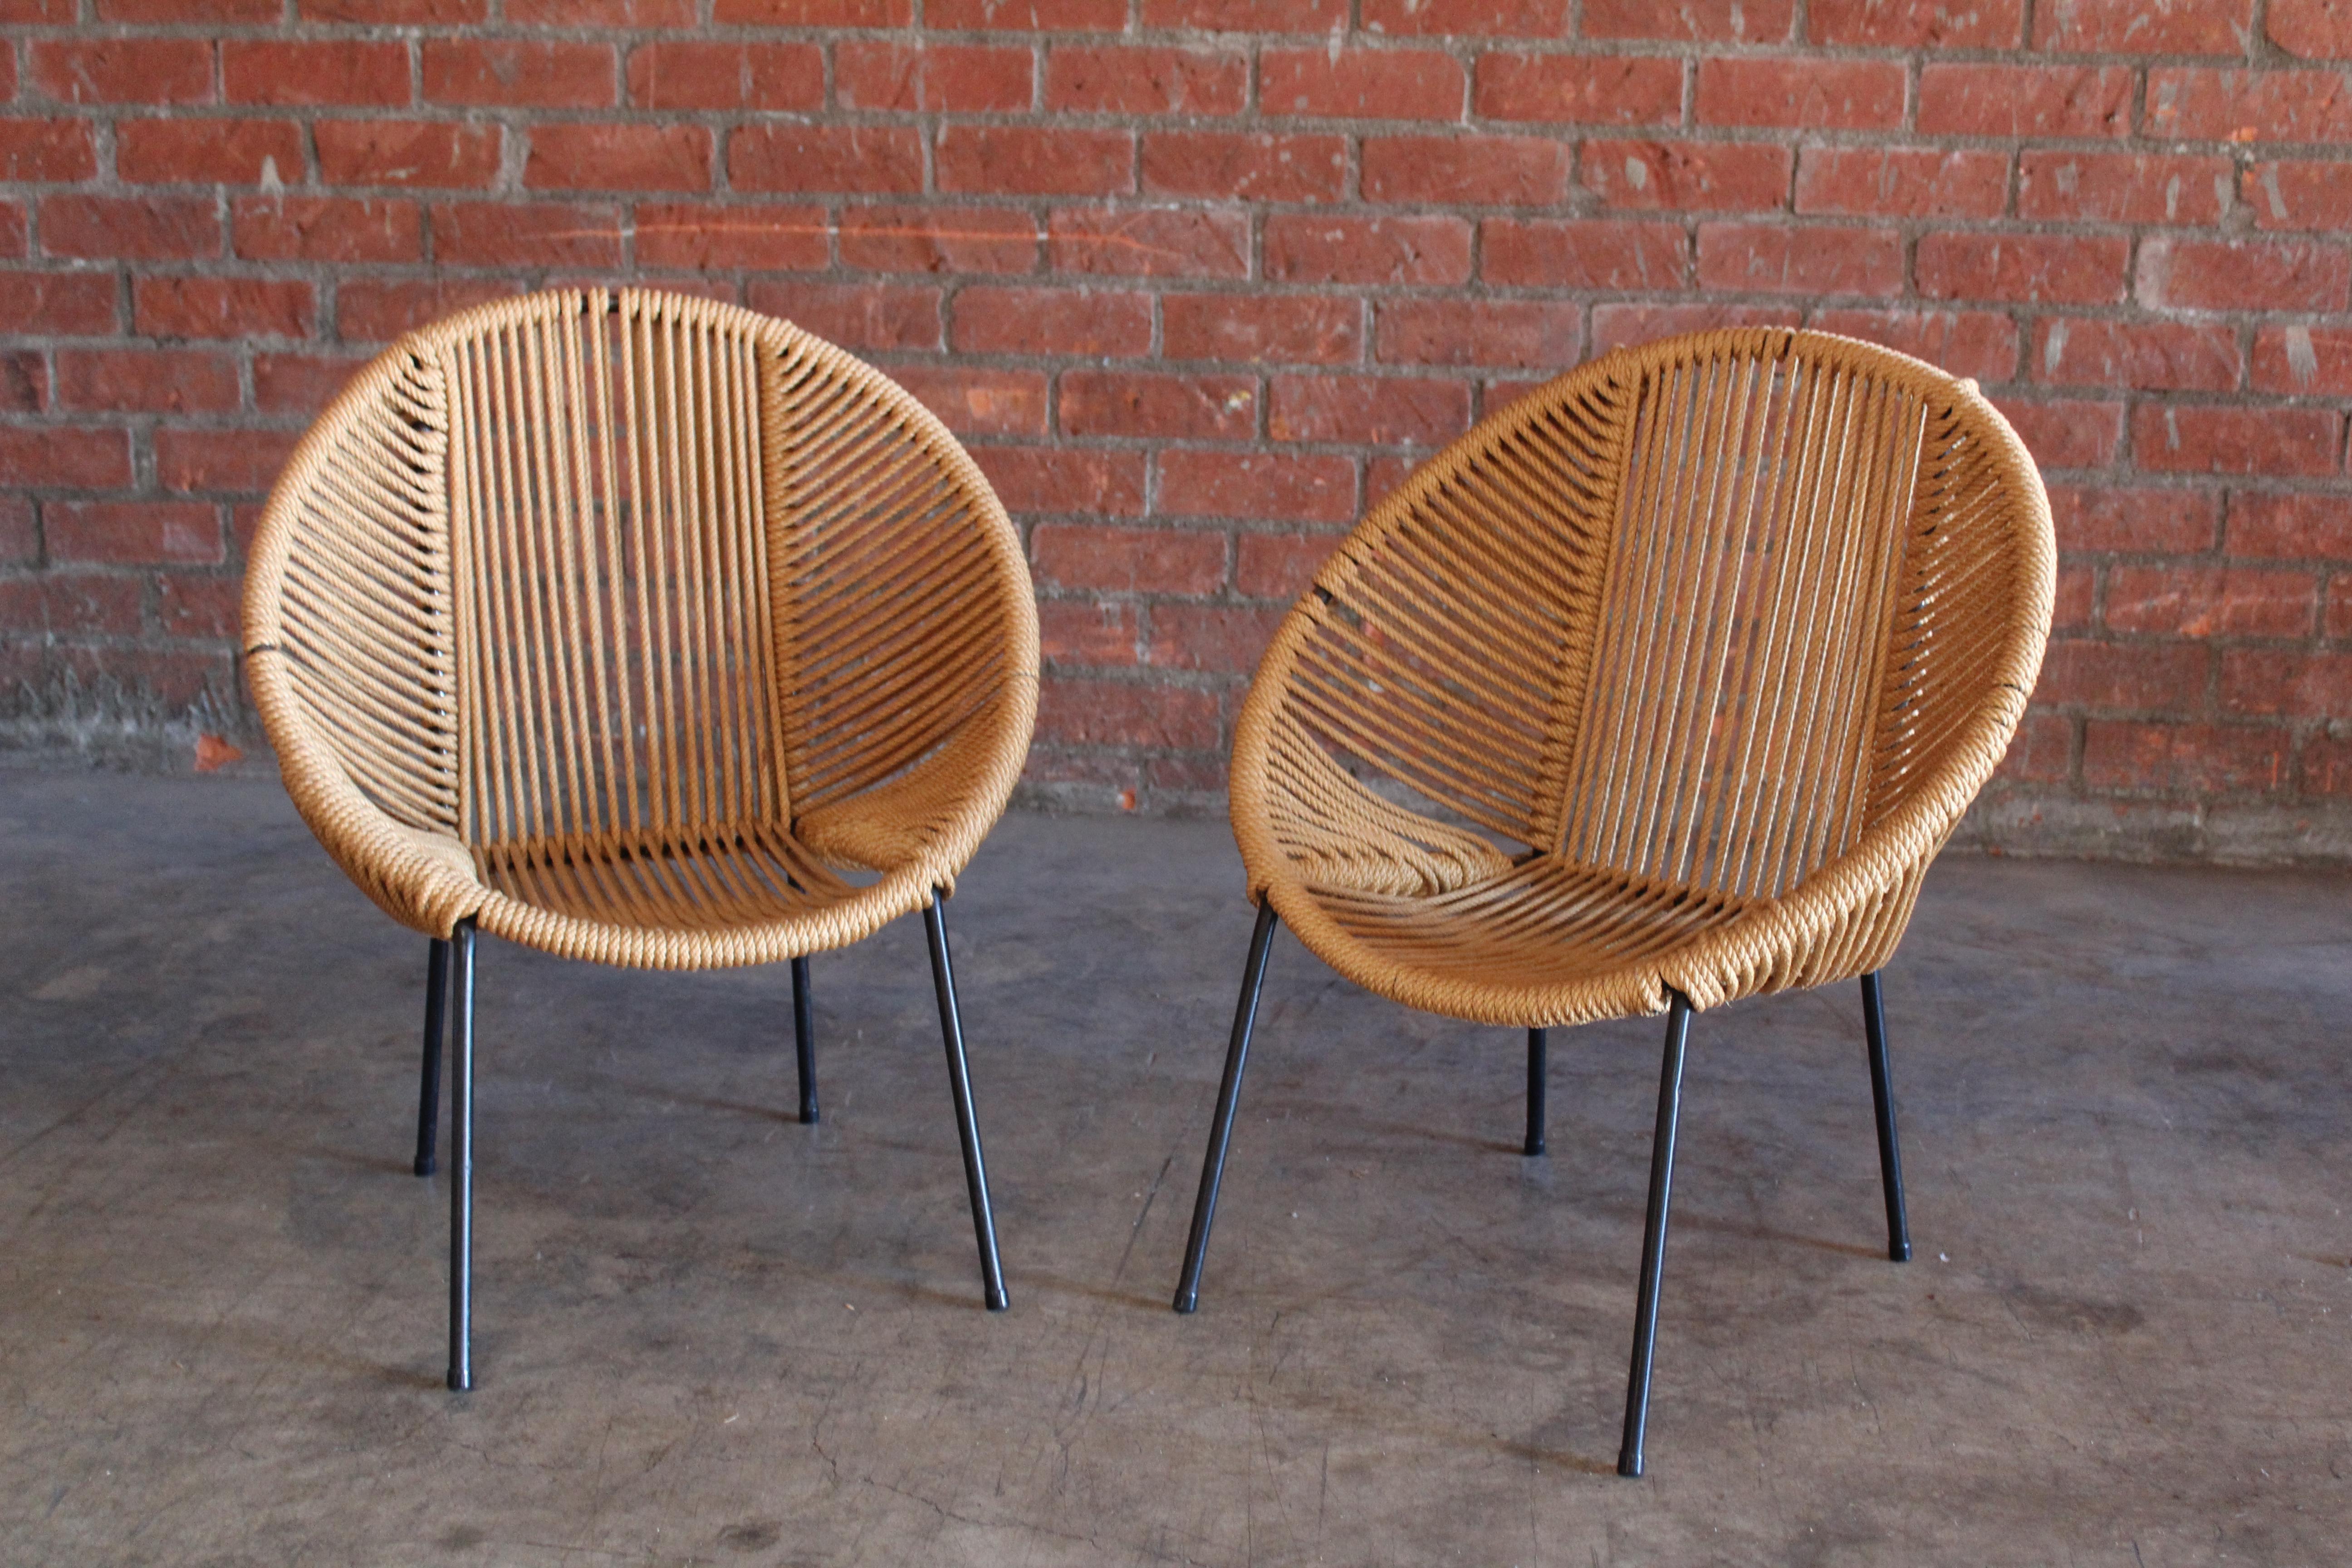 Mid-20th Century Pair of 1950s Children's Iron and Rope Chairs, France